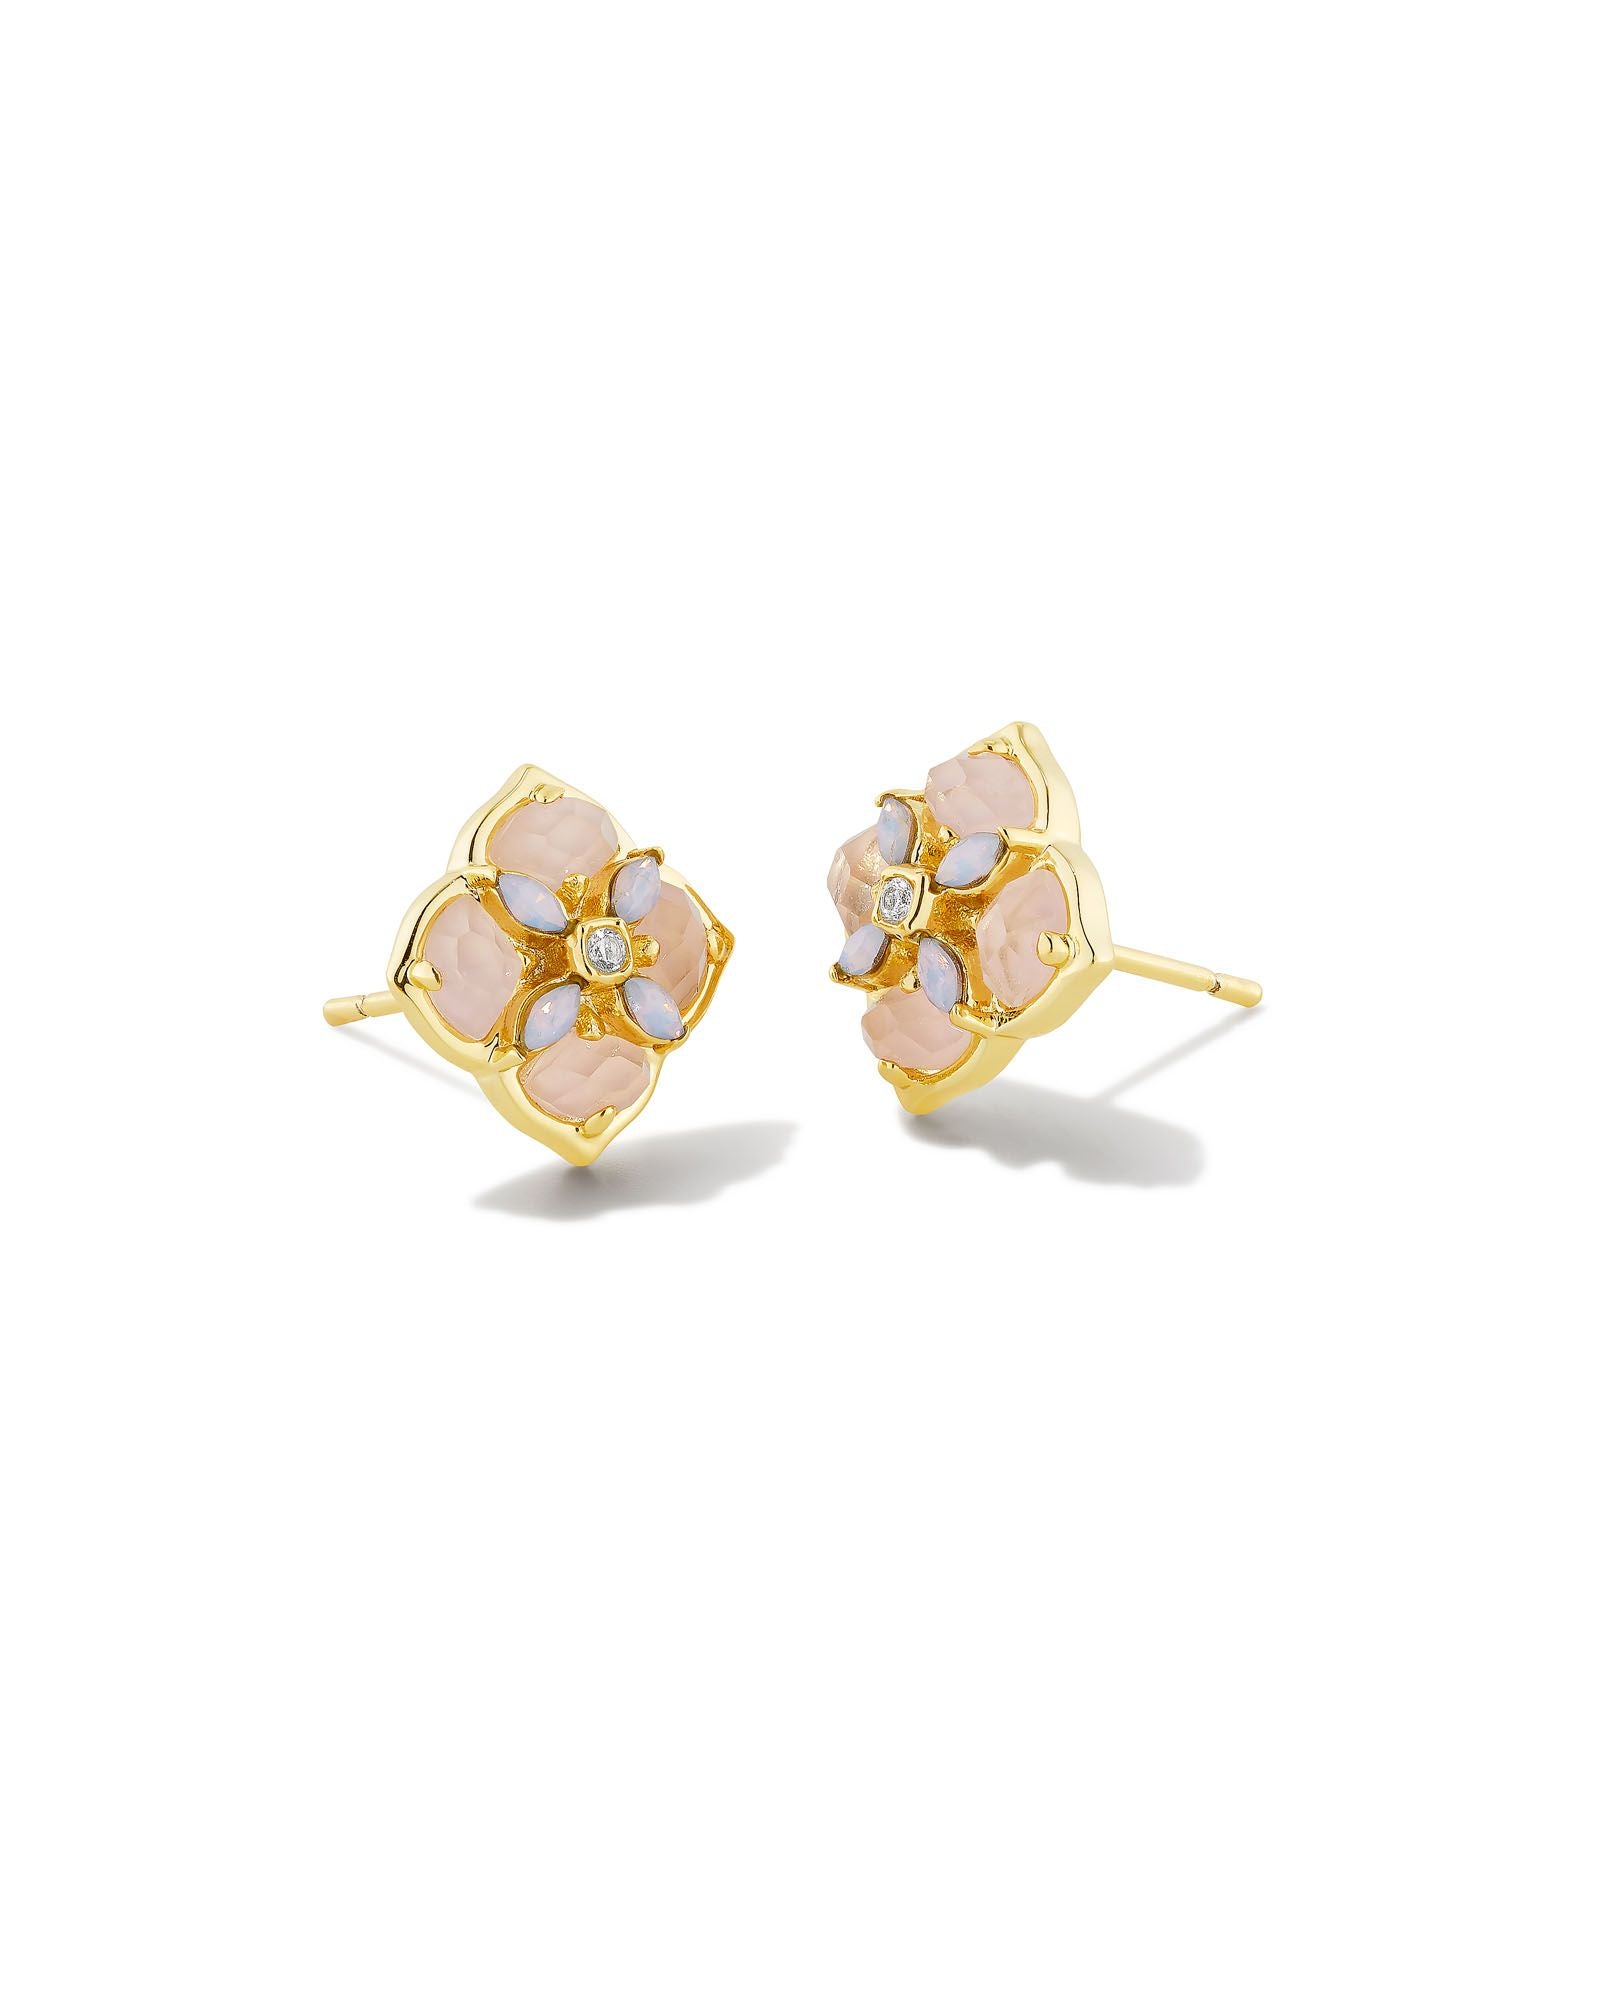 Dira Stone Stud Earring in Gold Pink Mix